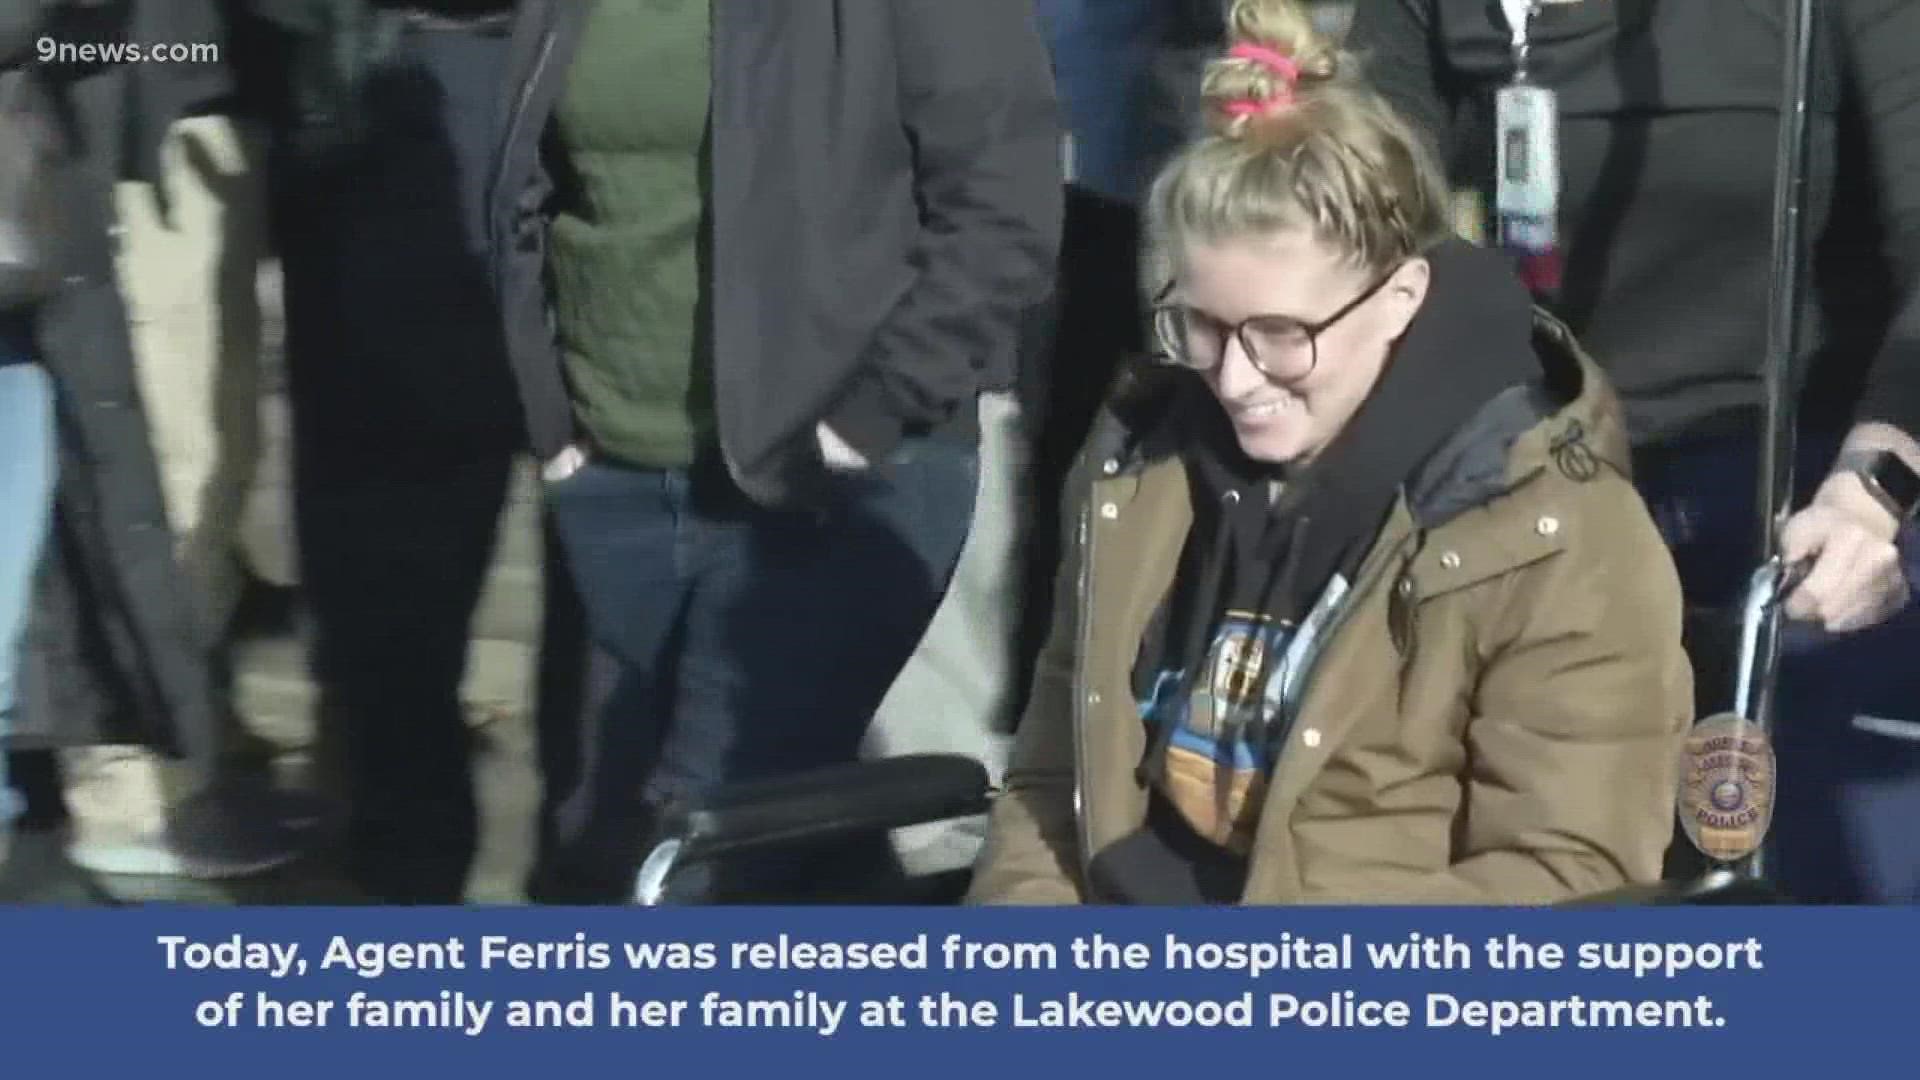 Police Agent Ashley Ferris spent more than a week in a hospital after taking the down gunman who shot her and others in Denver and Lakewood.